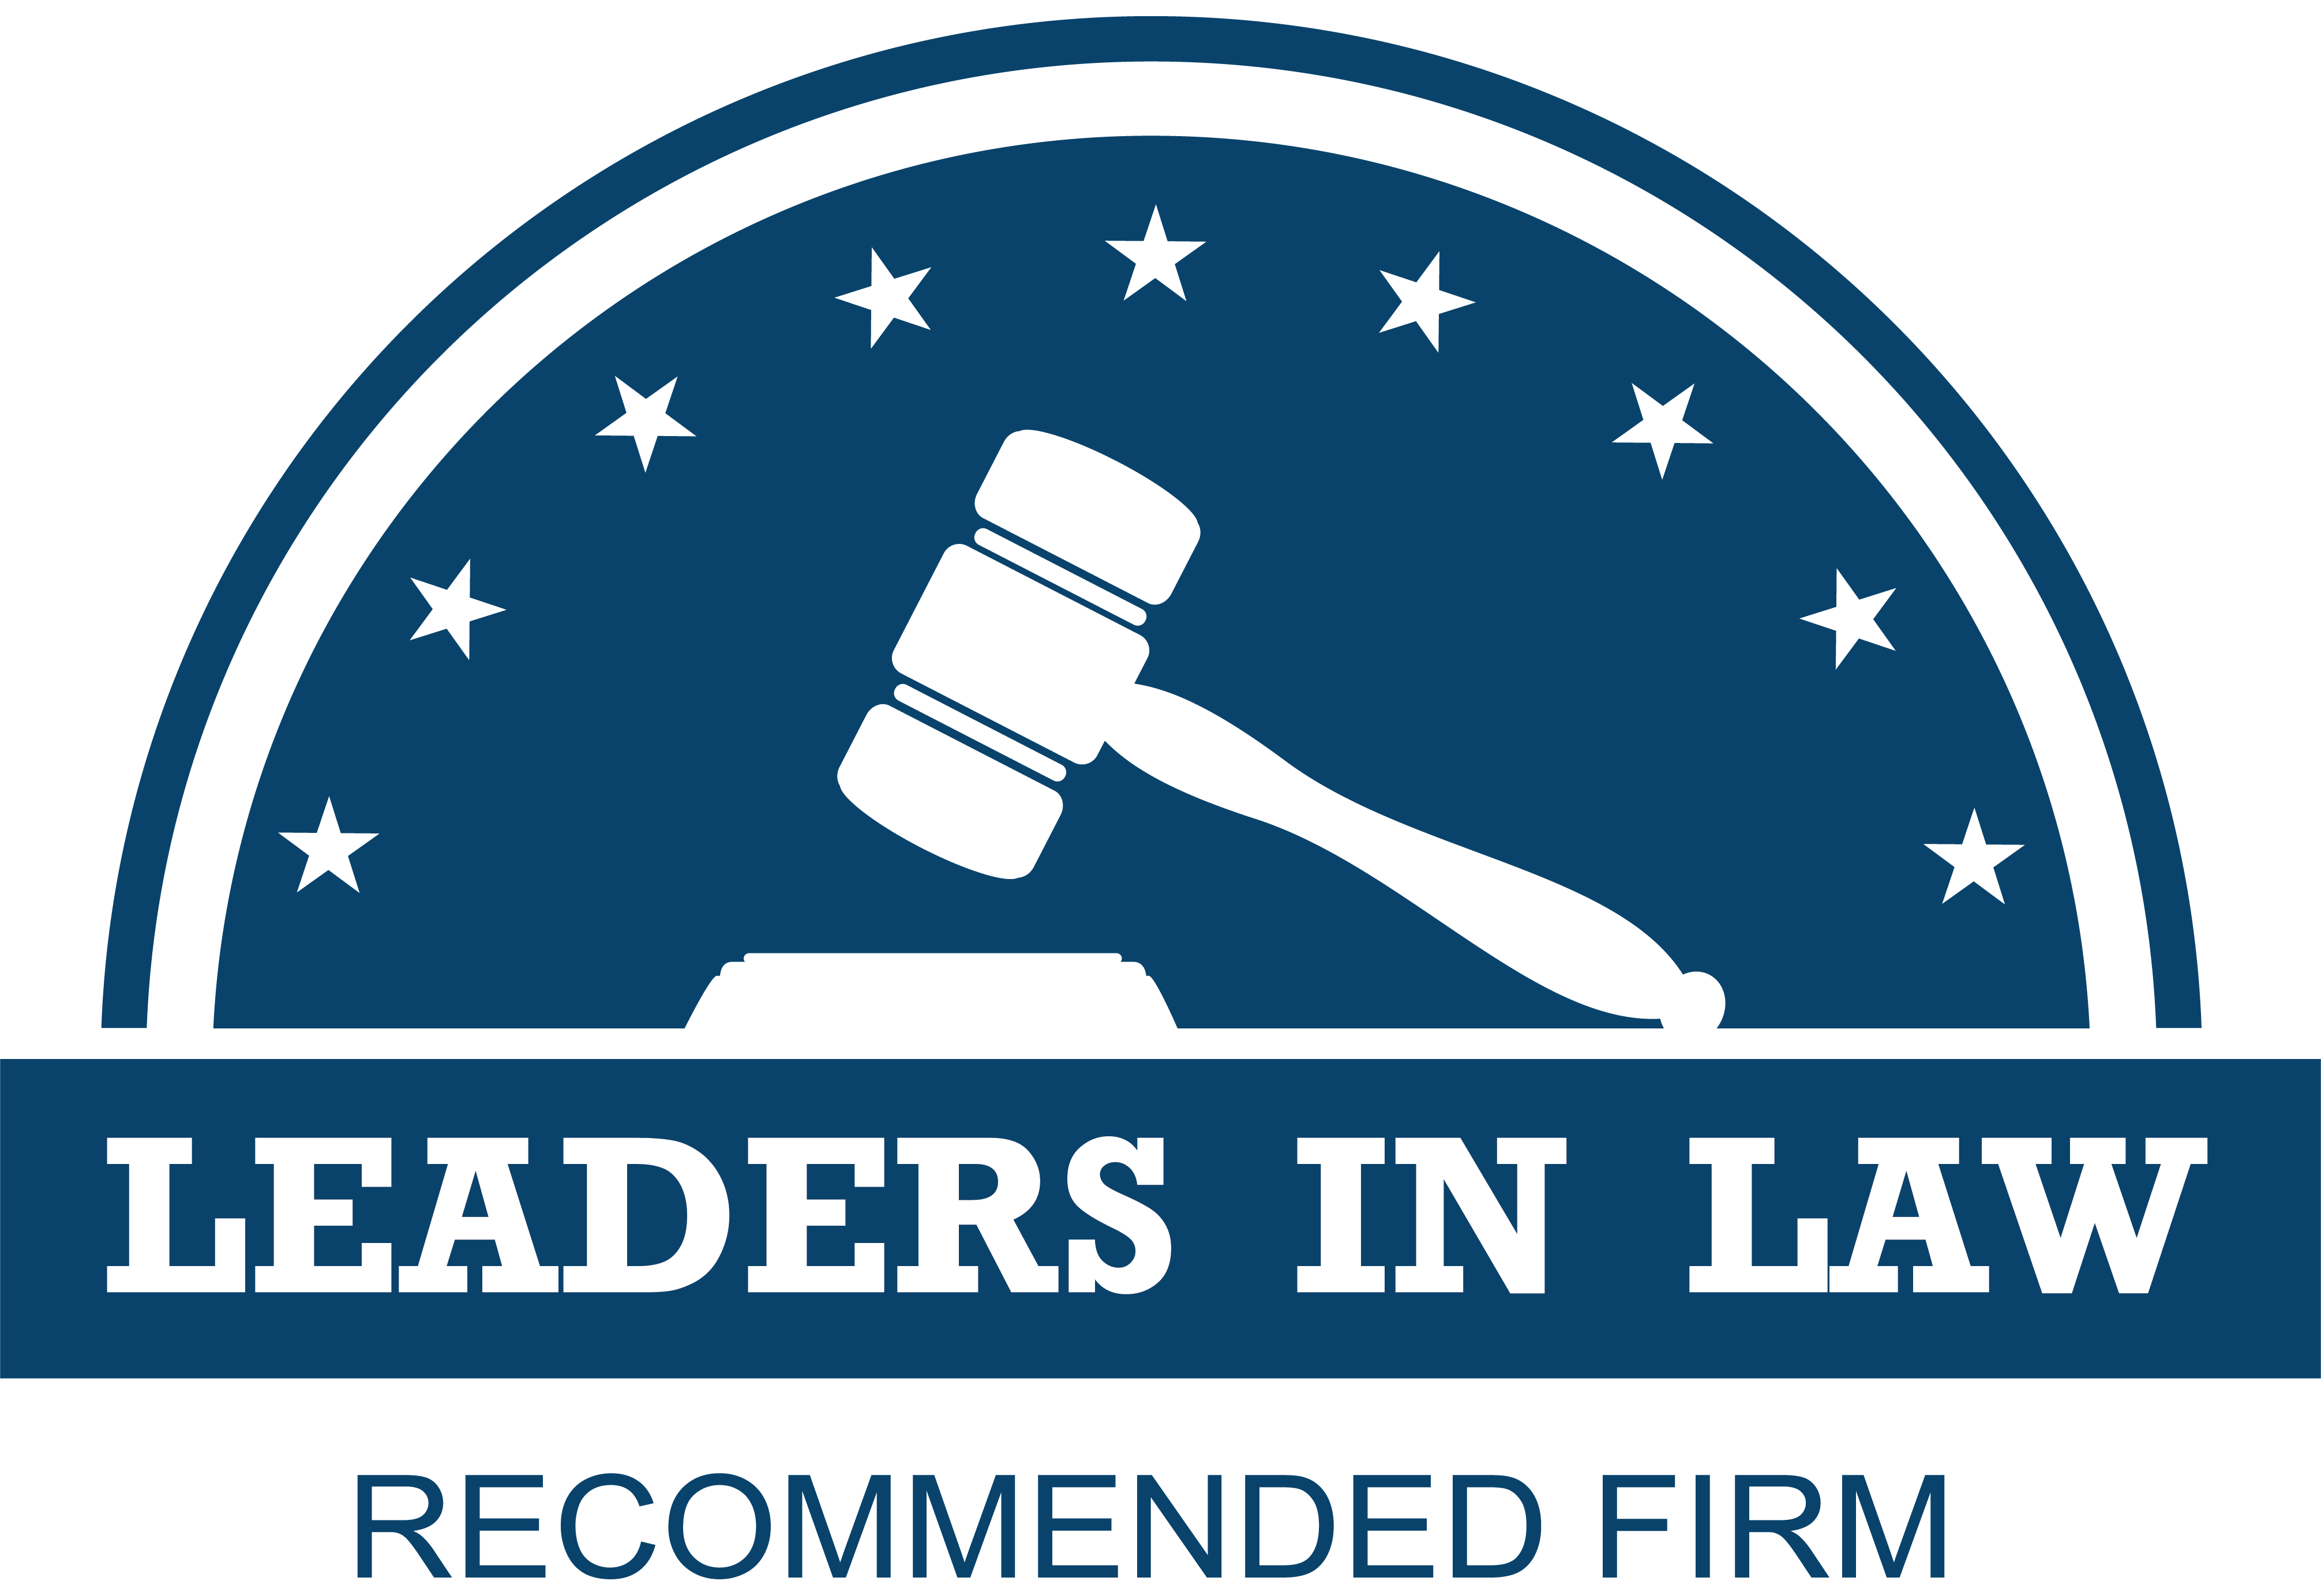 Alexandra Burger of Lyra Consulting is a member of Leaders in Law and grateful winner of their Global Private Equity Expert Award